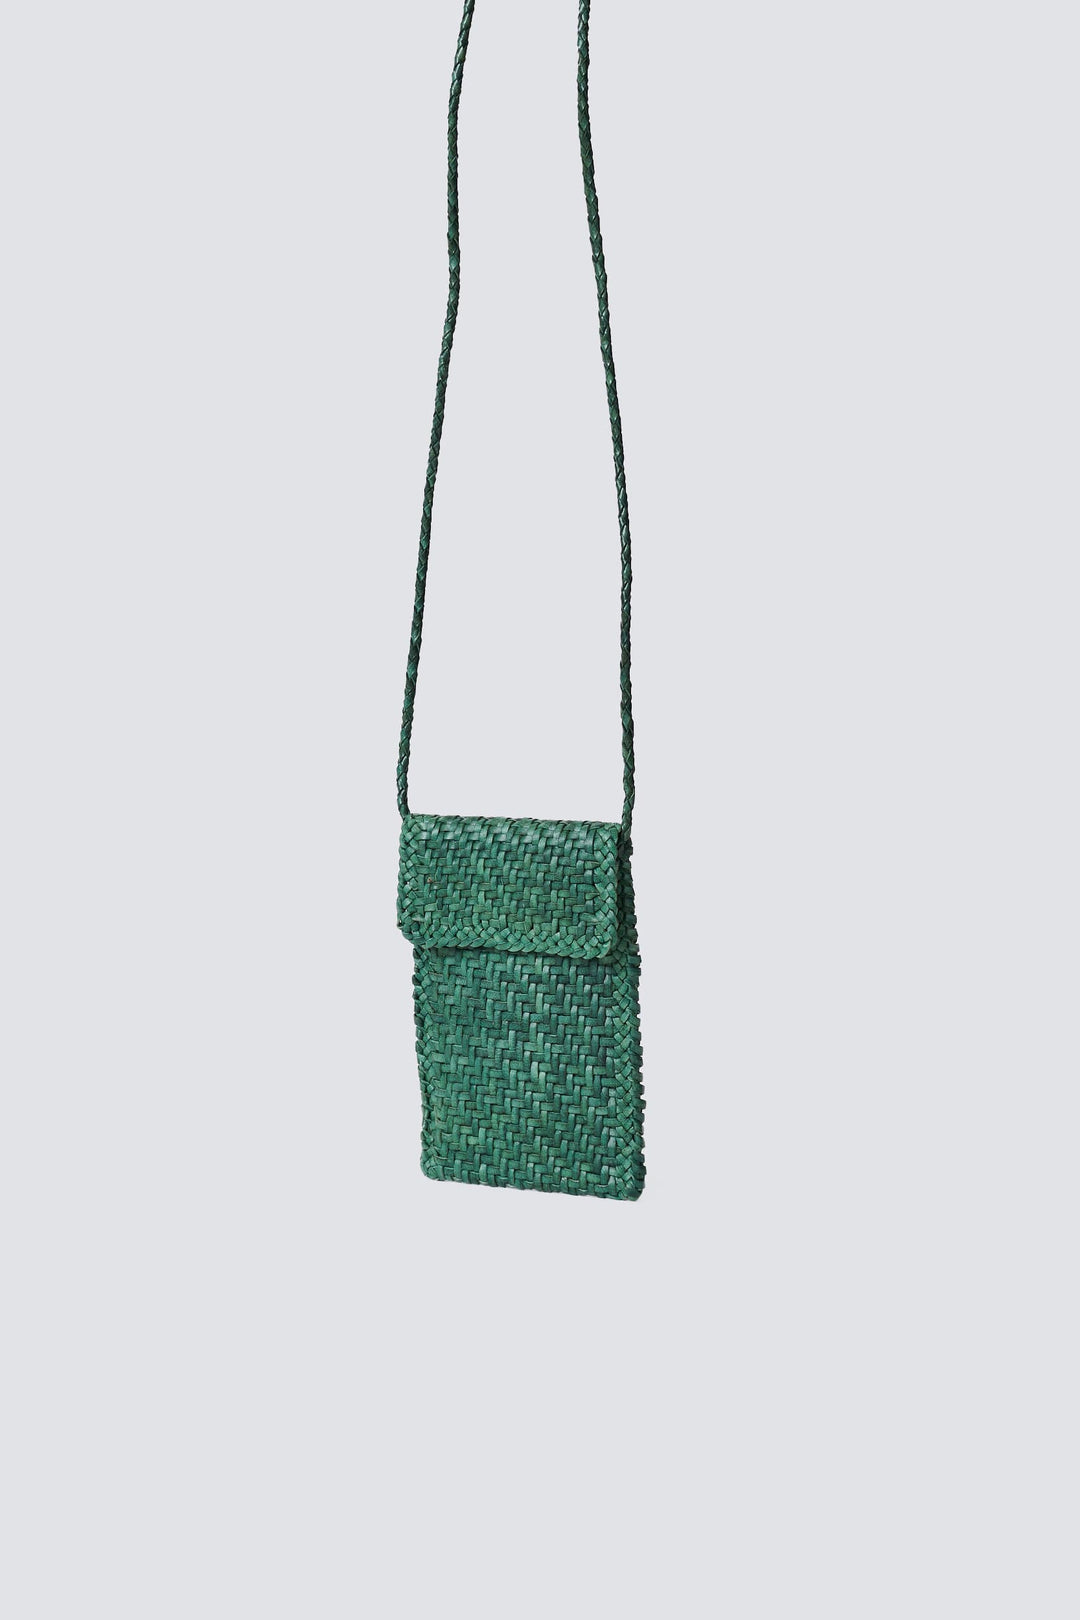 Dragon Diffusion woven leather bag handmade - Phone Crossbody Forest Green